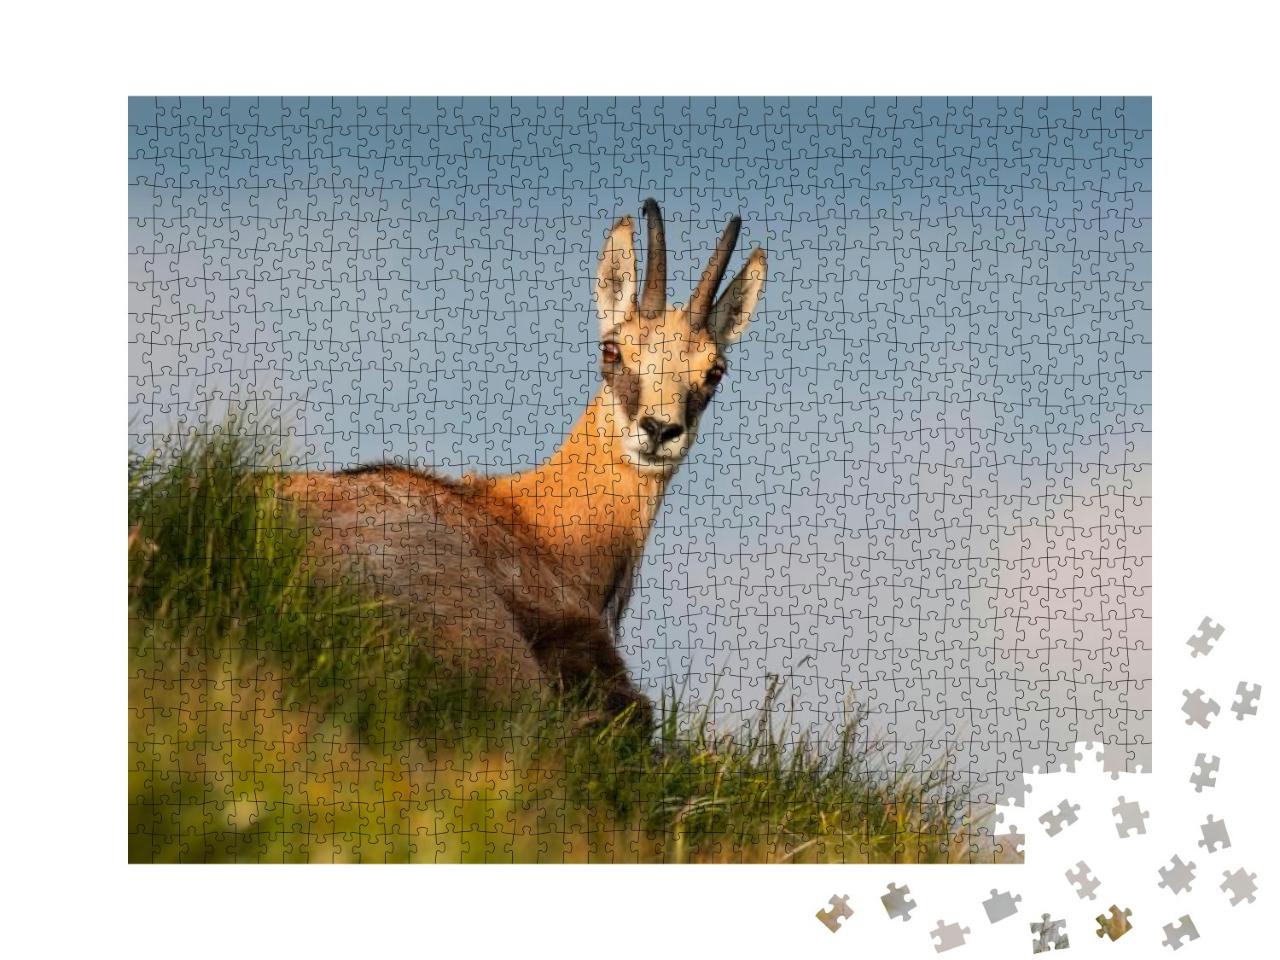 Chamois Rupicapra Rupicapra Beautiful Species of Goat Sta... Jigsaw Puzzle with 1000 pieces